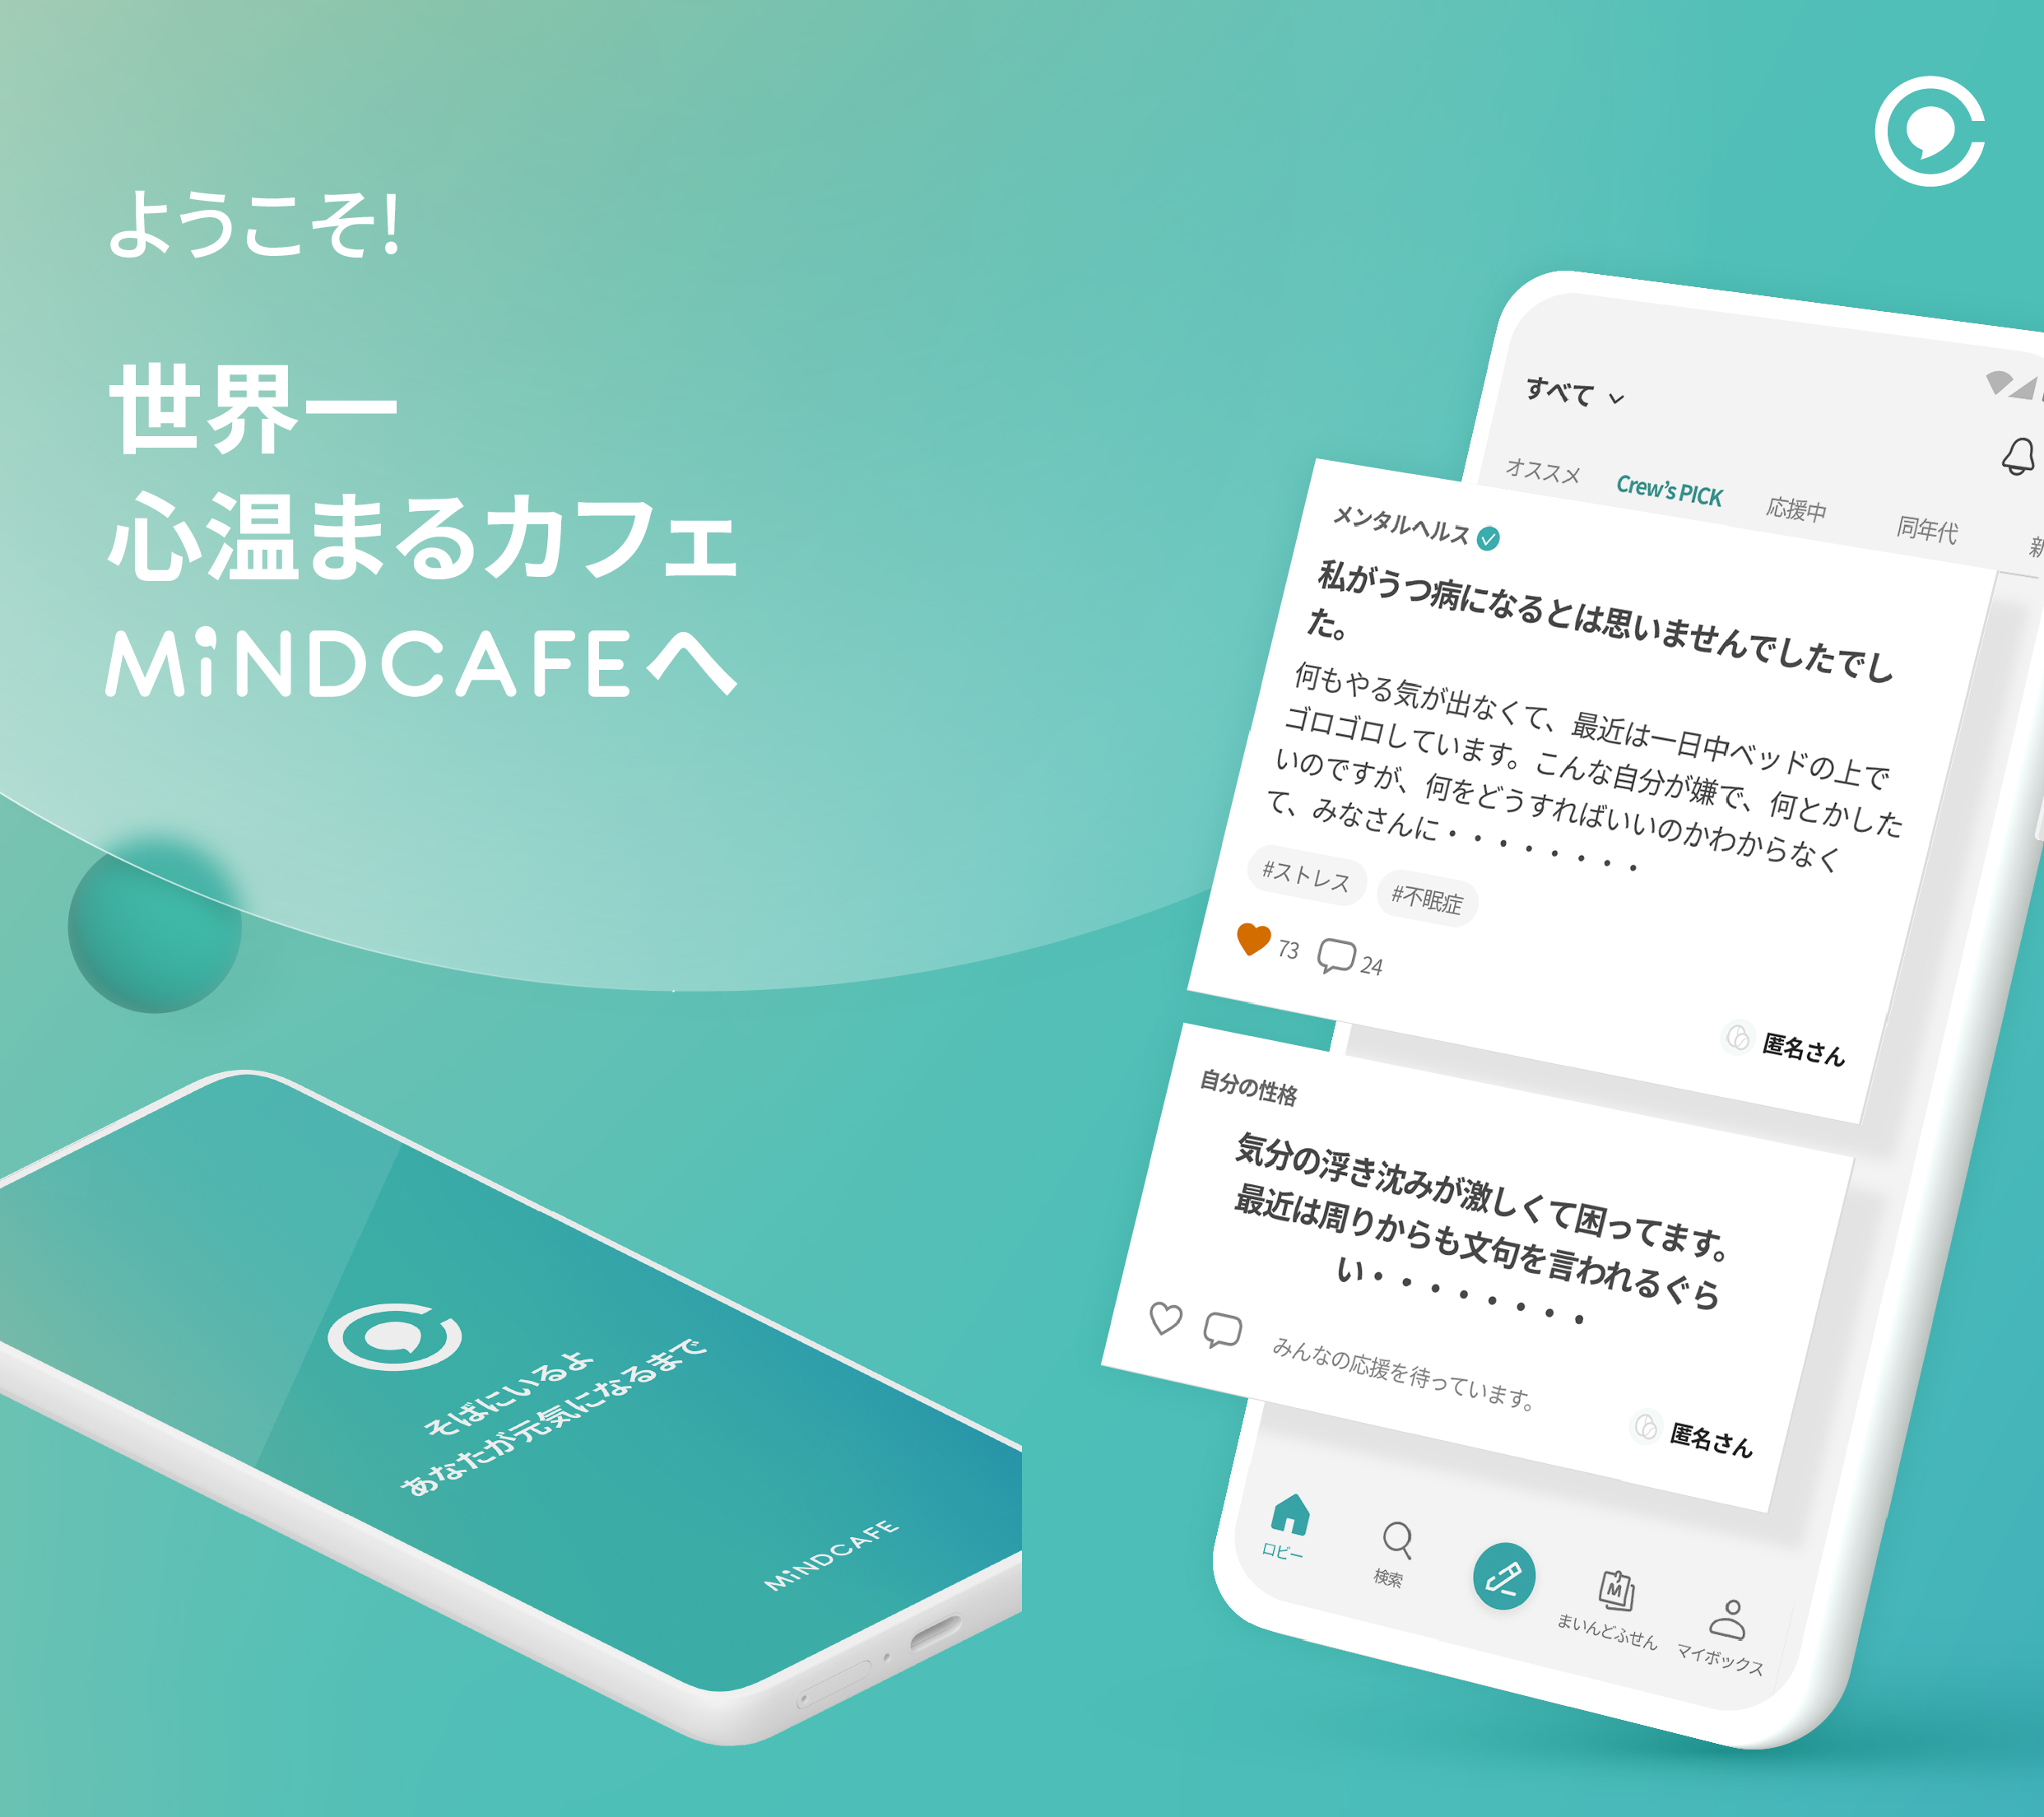 Korean startup Atomers, which operates Korea's No. 1 mental care platform 'Mind Café' with 1.5 million members, announced it had launched its first global service for Japanese users.